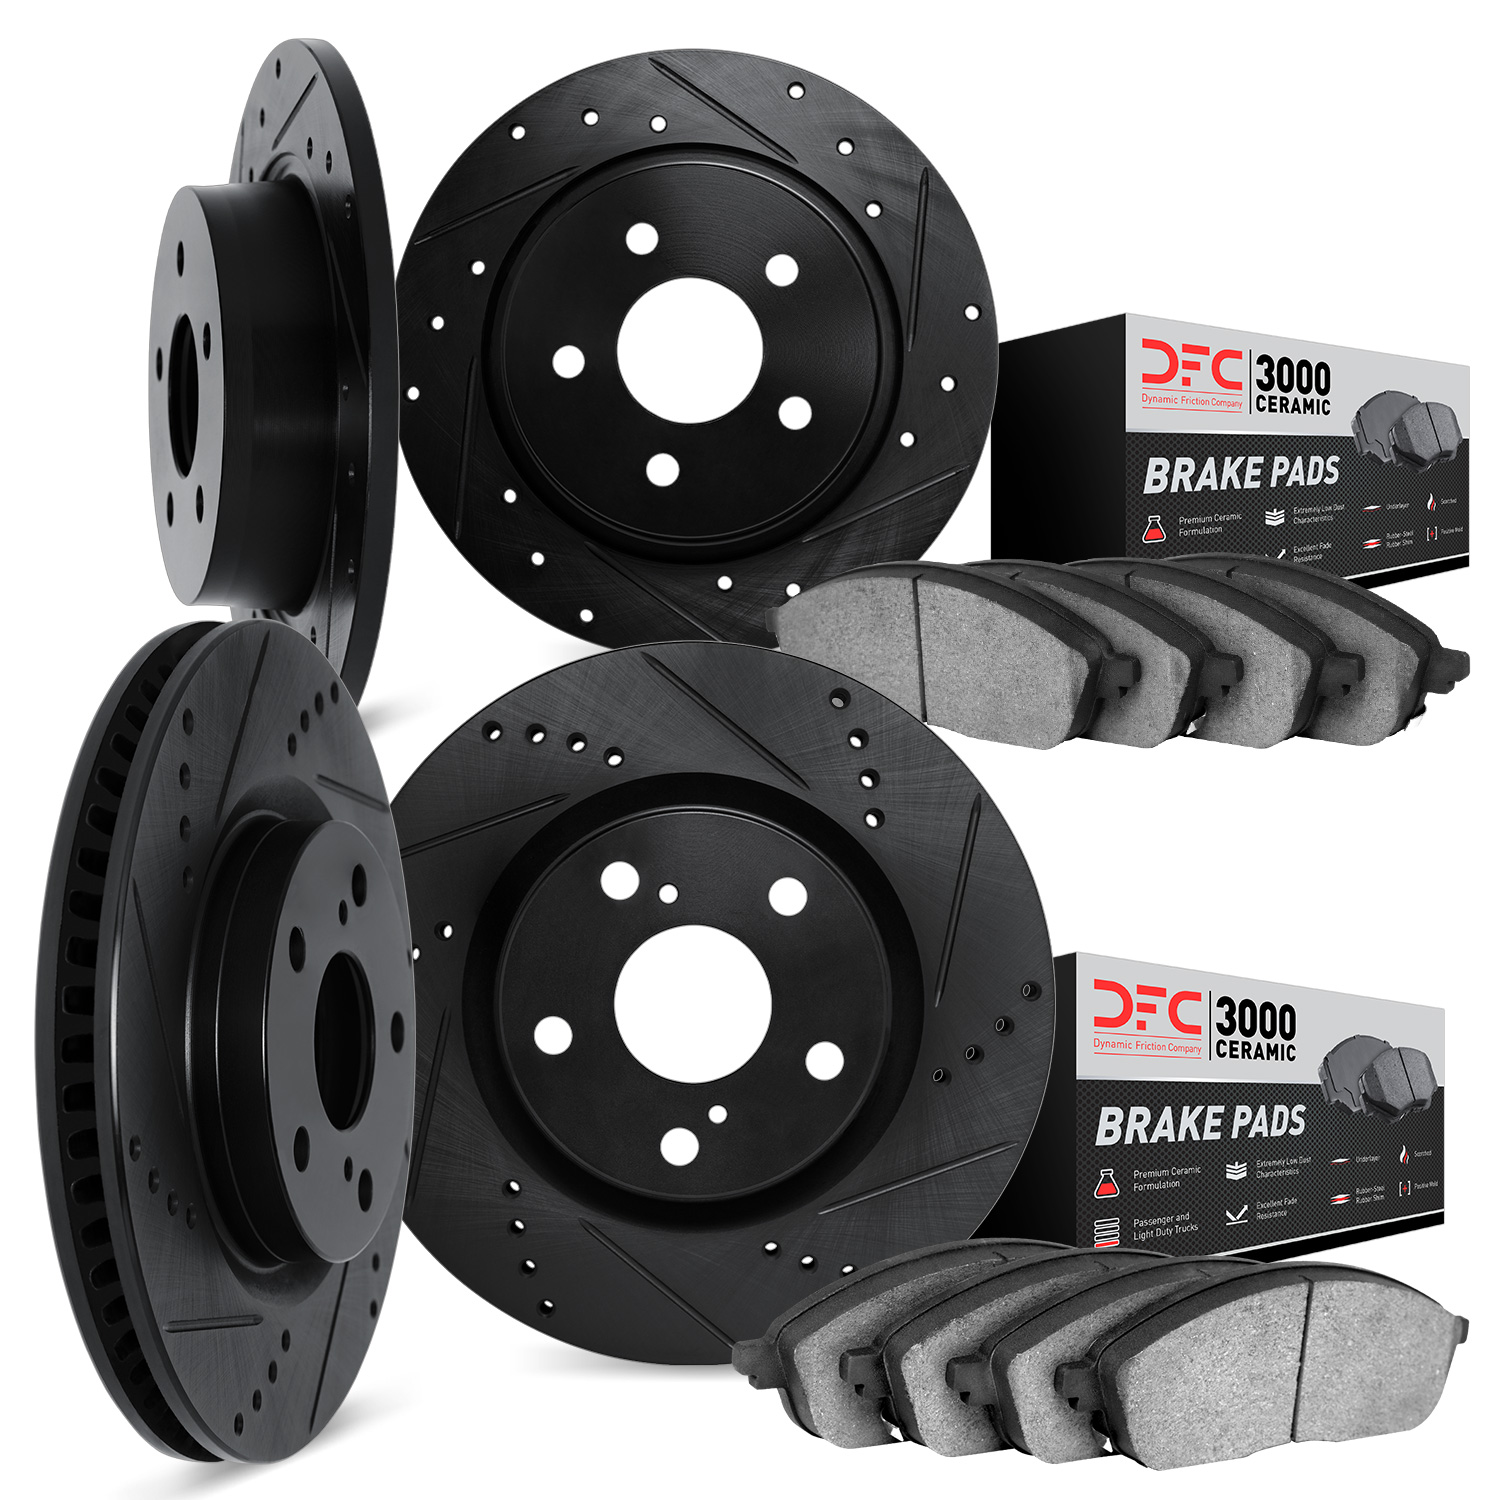 8304-63064 Drilled/Slotted Brake Rotors with 3000-Series Ceramic Brake Pads Kit [Black], 1991-1999 Mercedes-Benz, Position: Fron